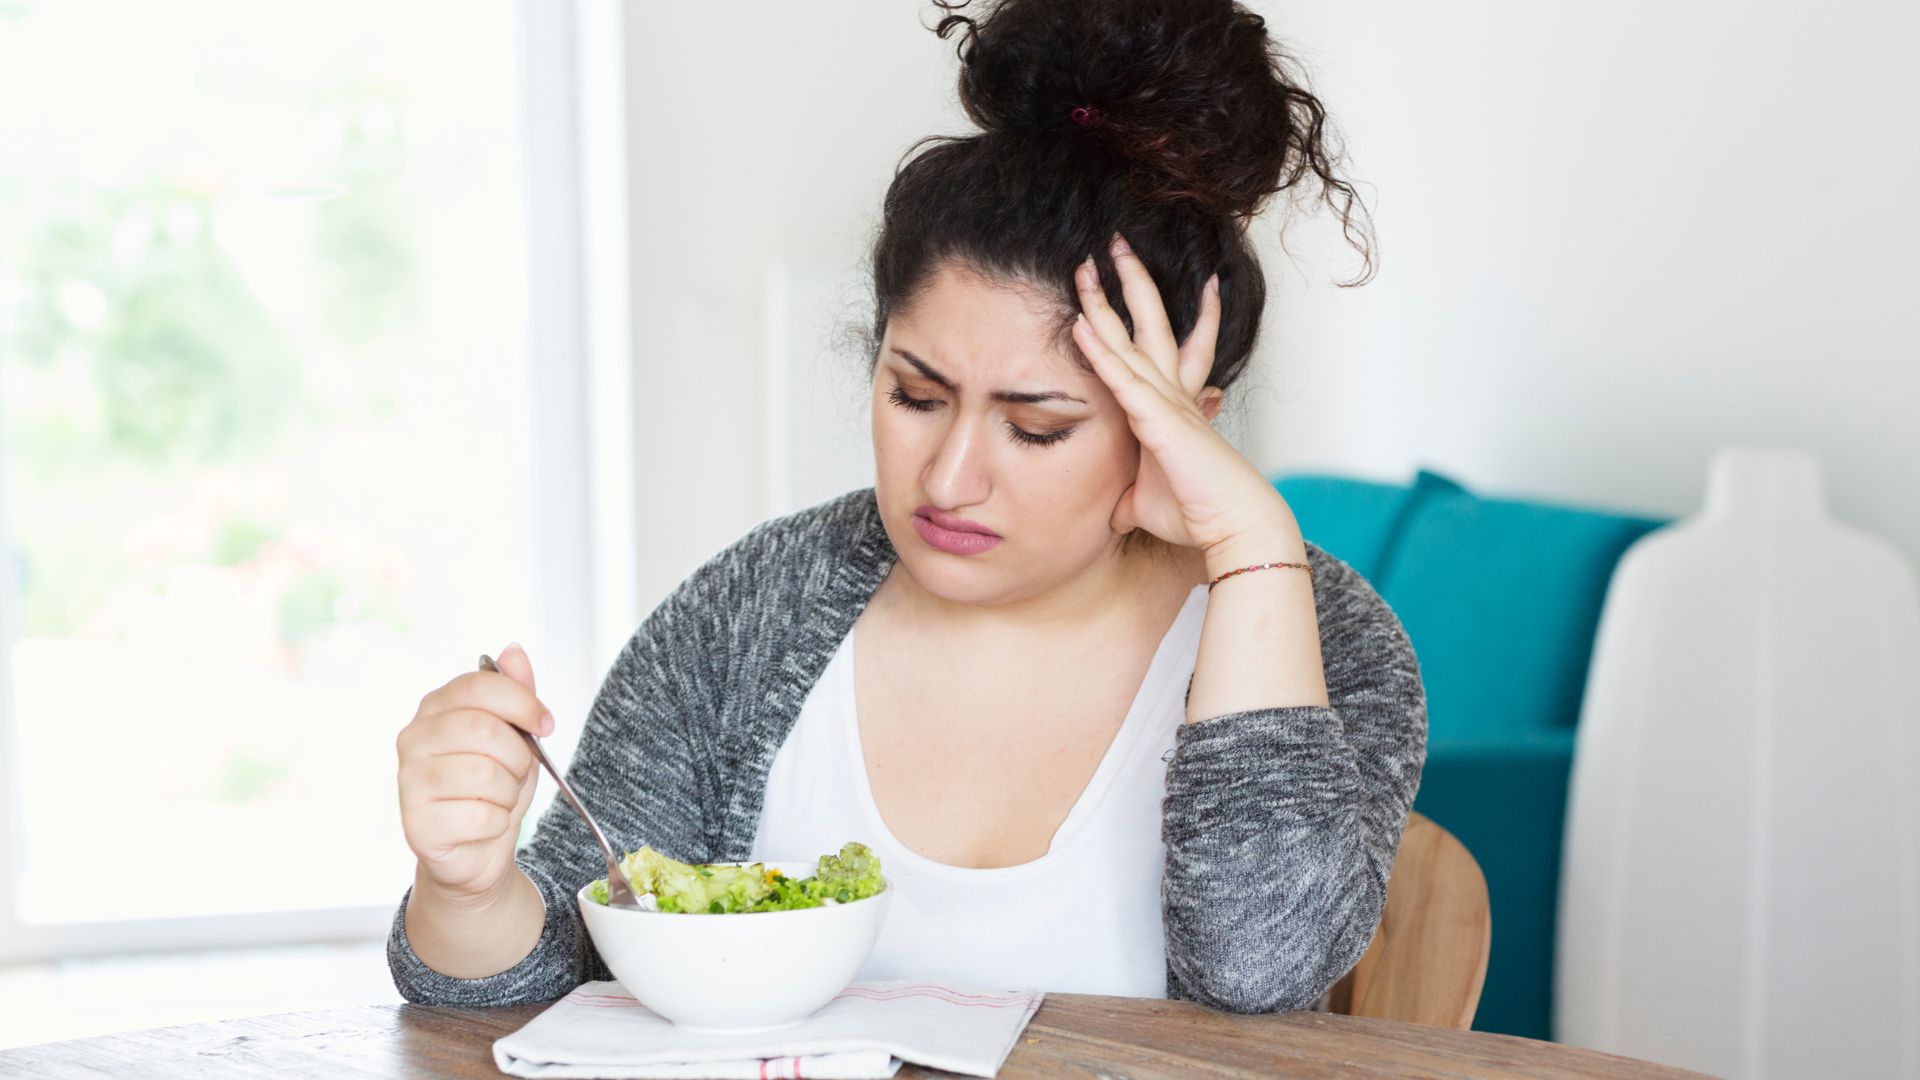 A woman frowns down at her salad, dissatisfied. Picture illustrates how a calorie deficit diet might be harmful.